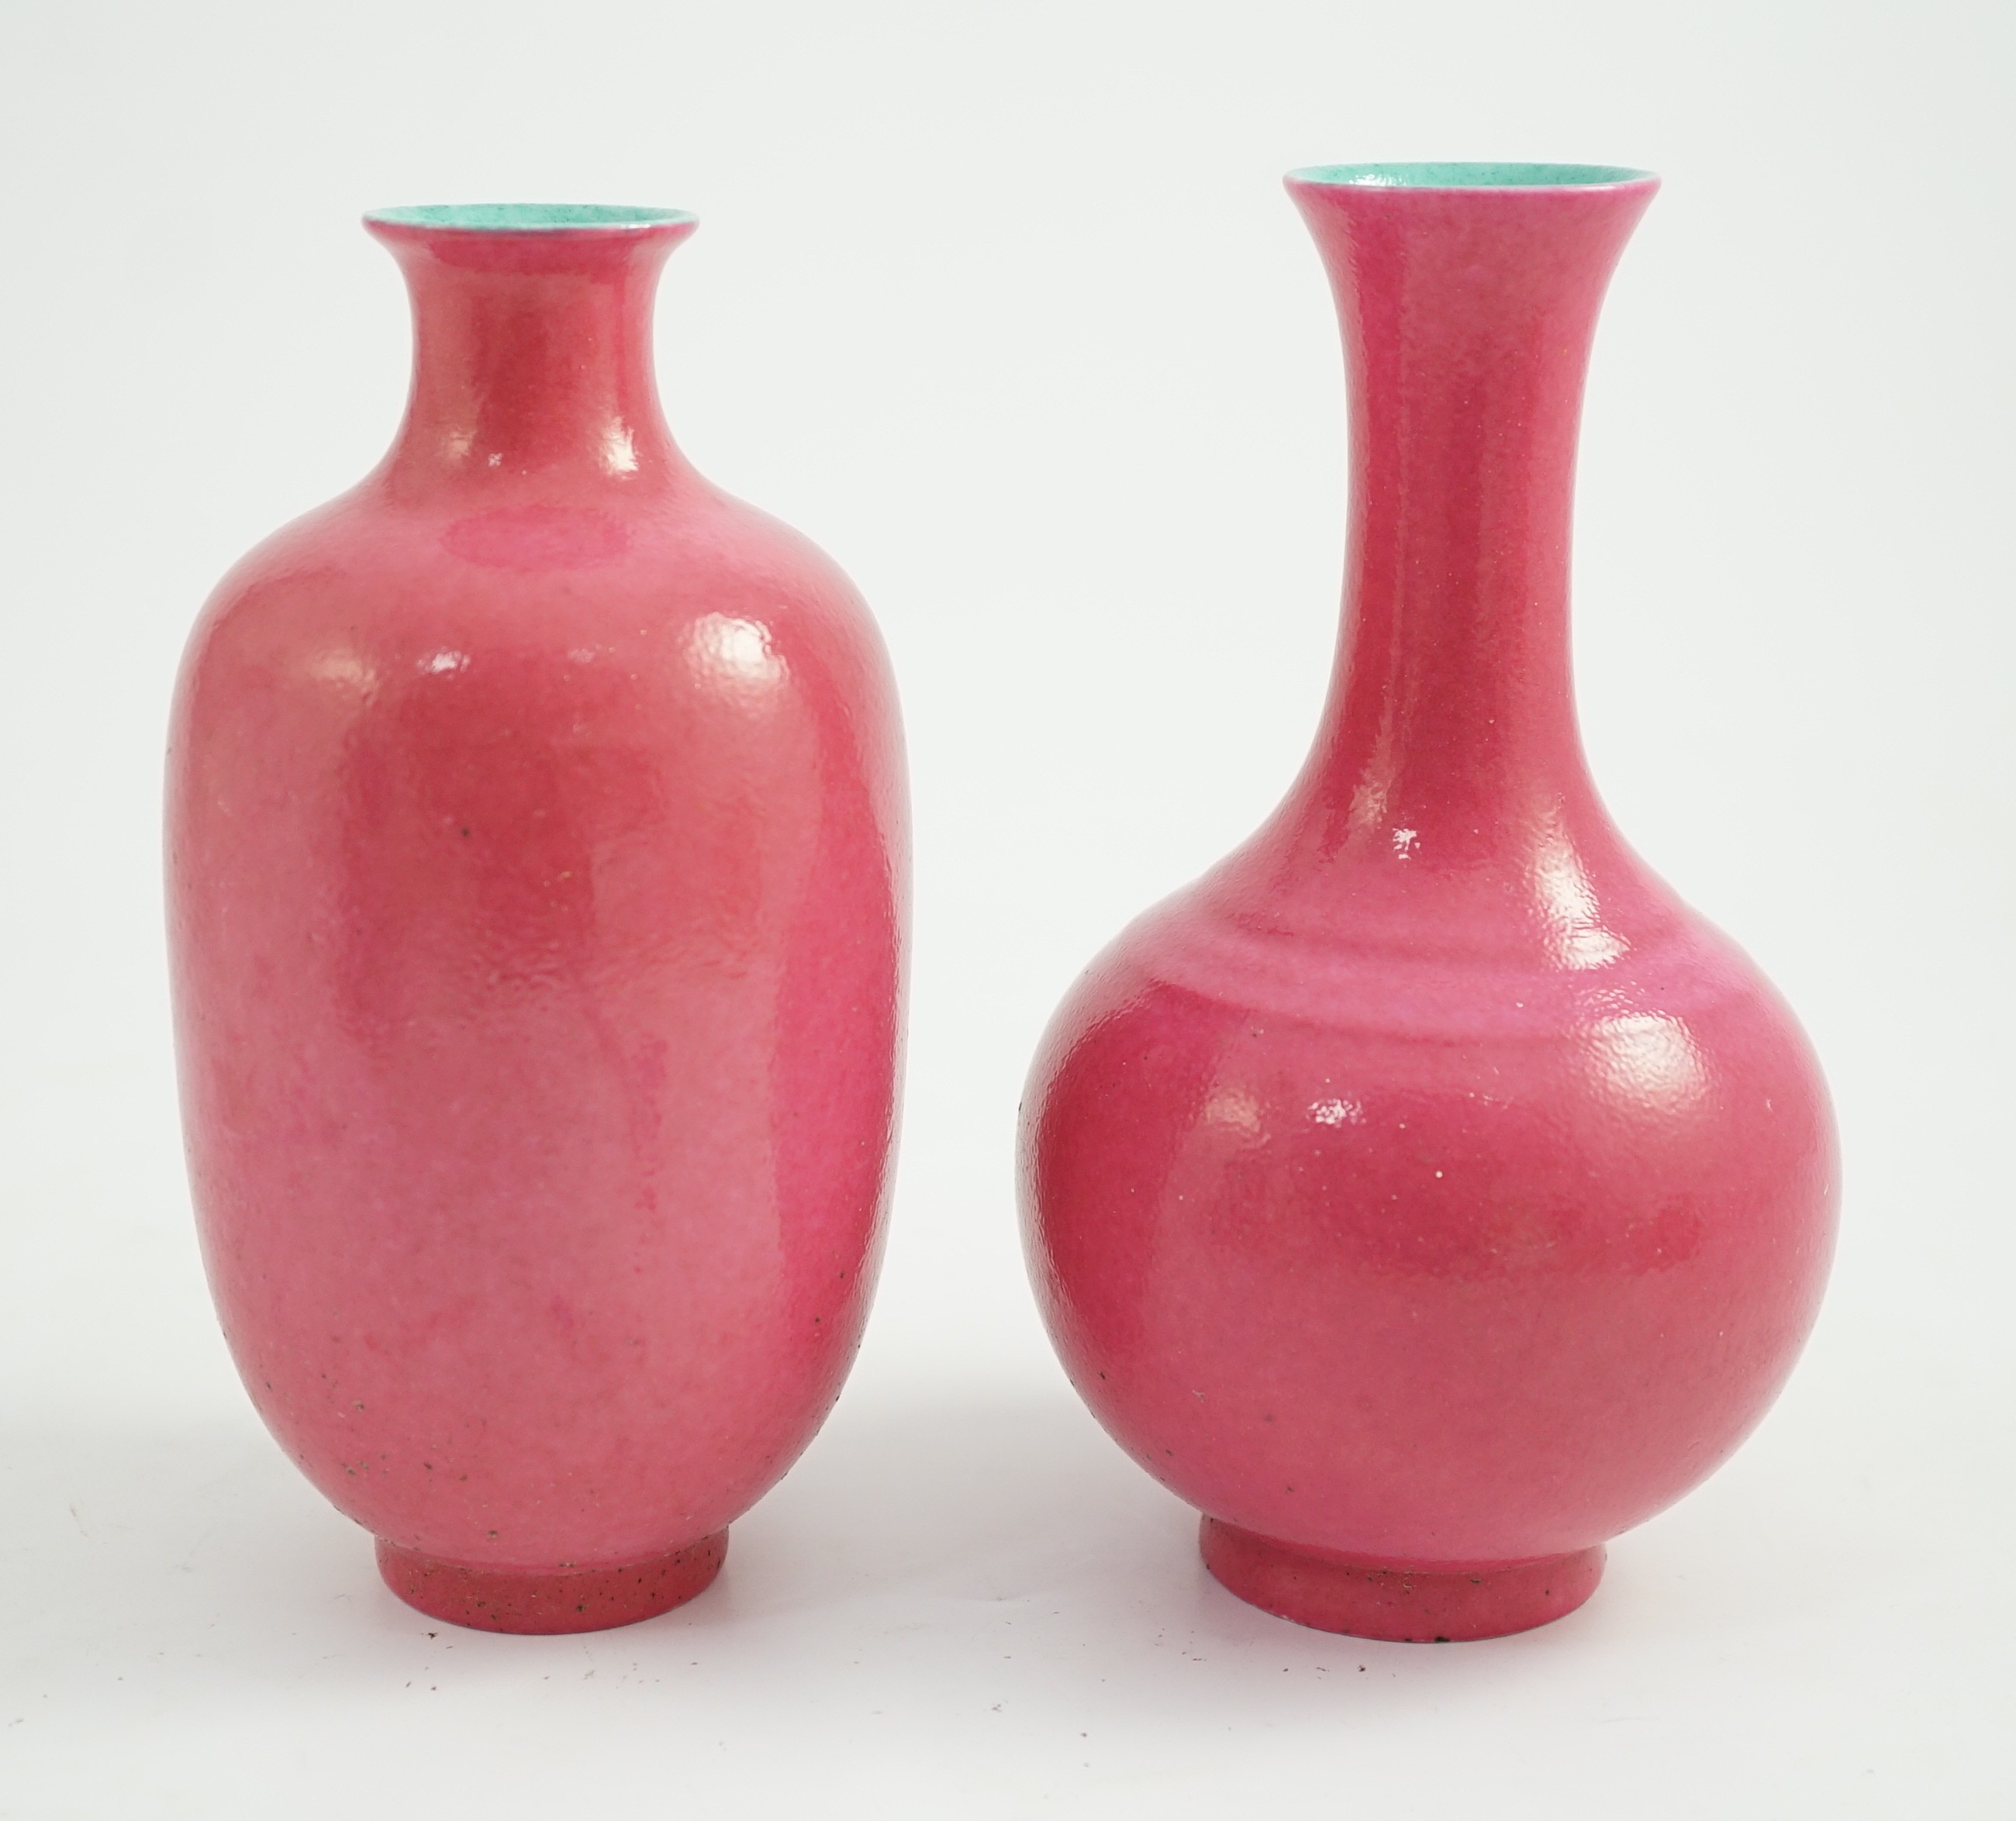 Two Chinese ruby ground vases, possibly Republic period, each with a printed four character Qianlong mark, 18.5 and 19.4cm high